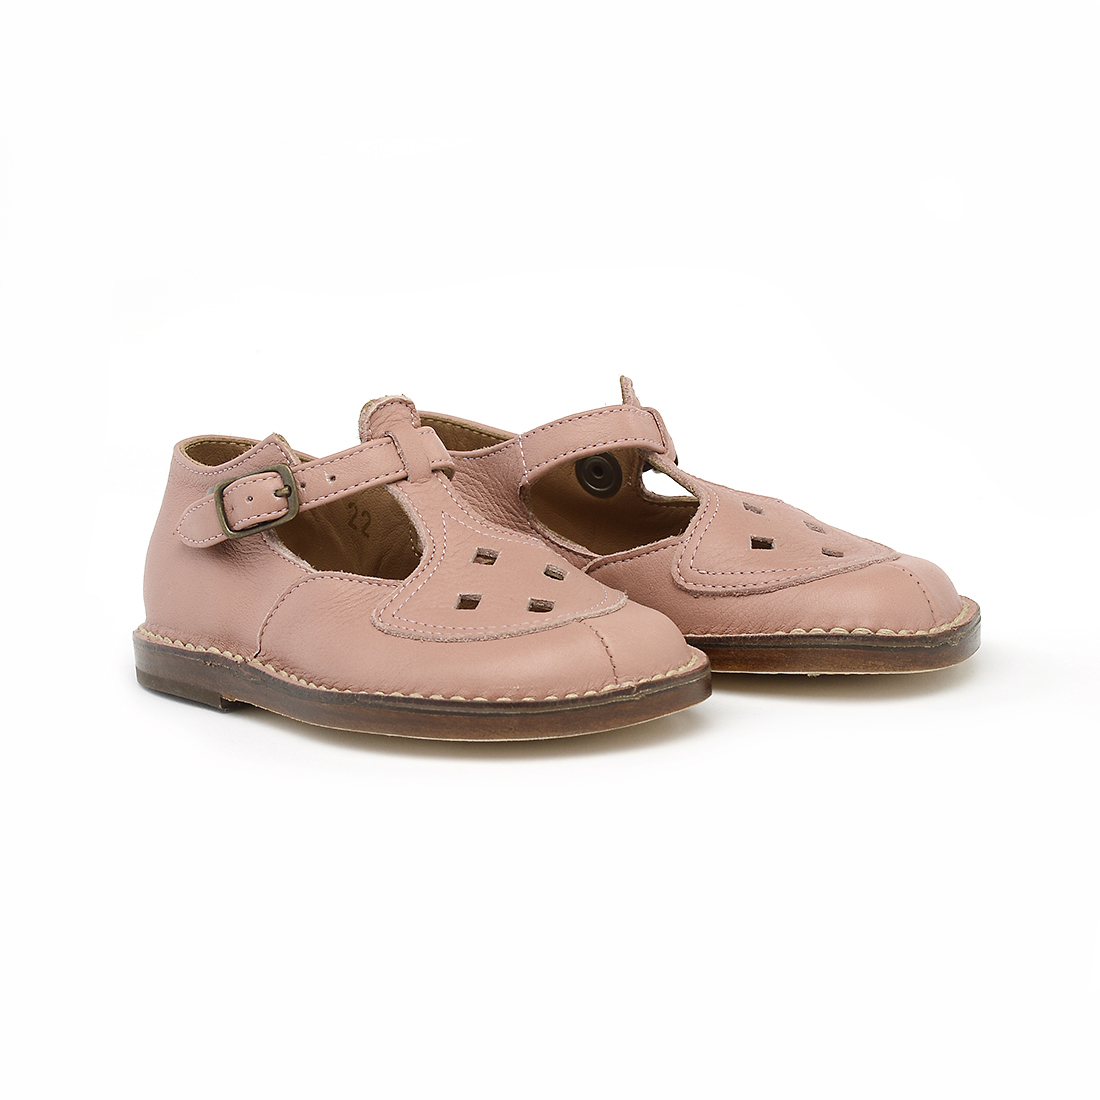 Discover all the products of PèPè Children Shoes universe